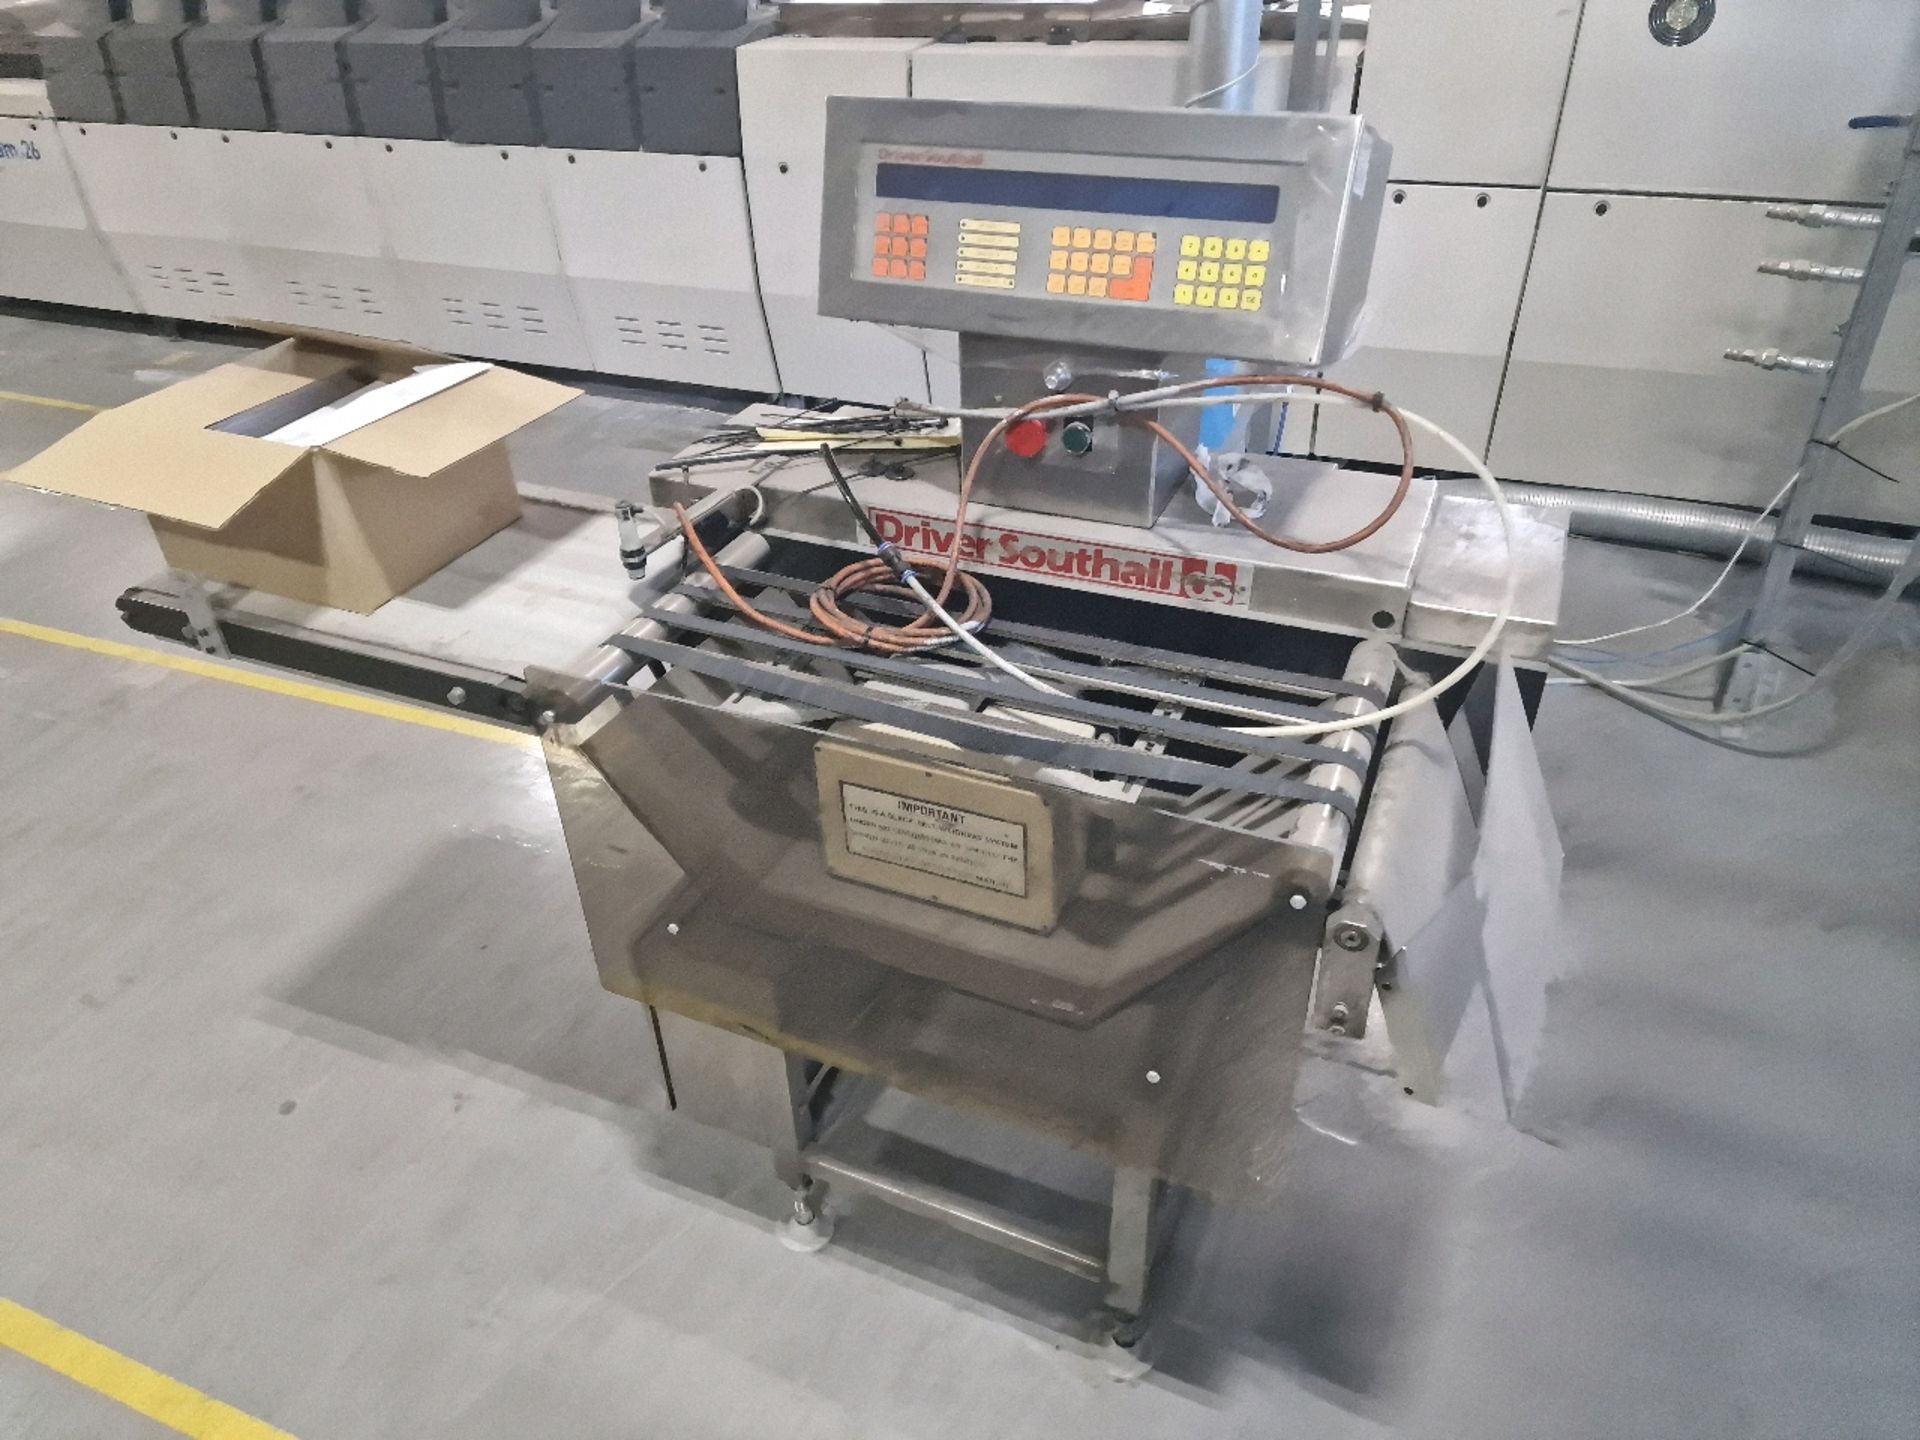 Driver Southall Check Weigher